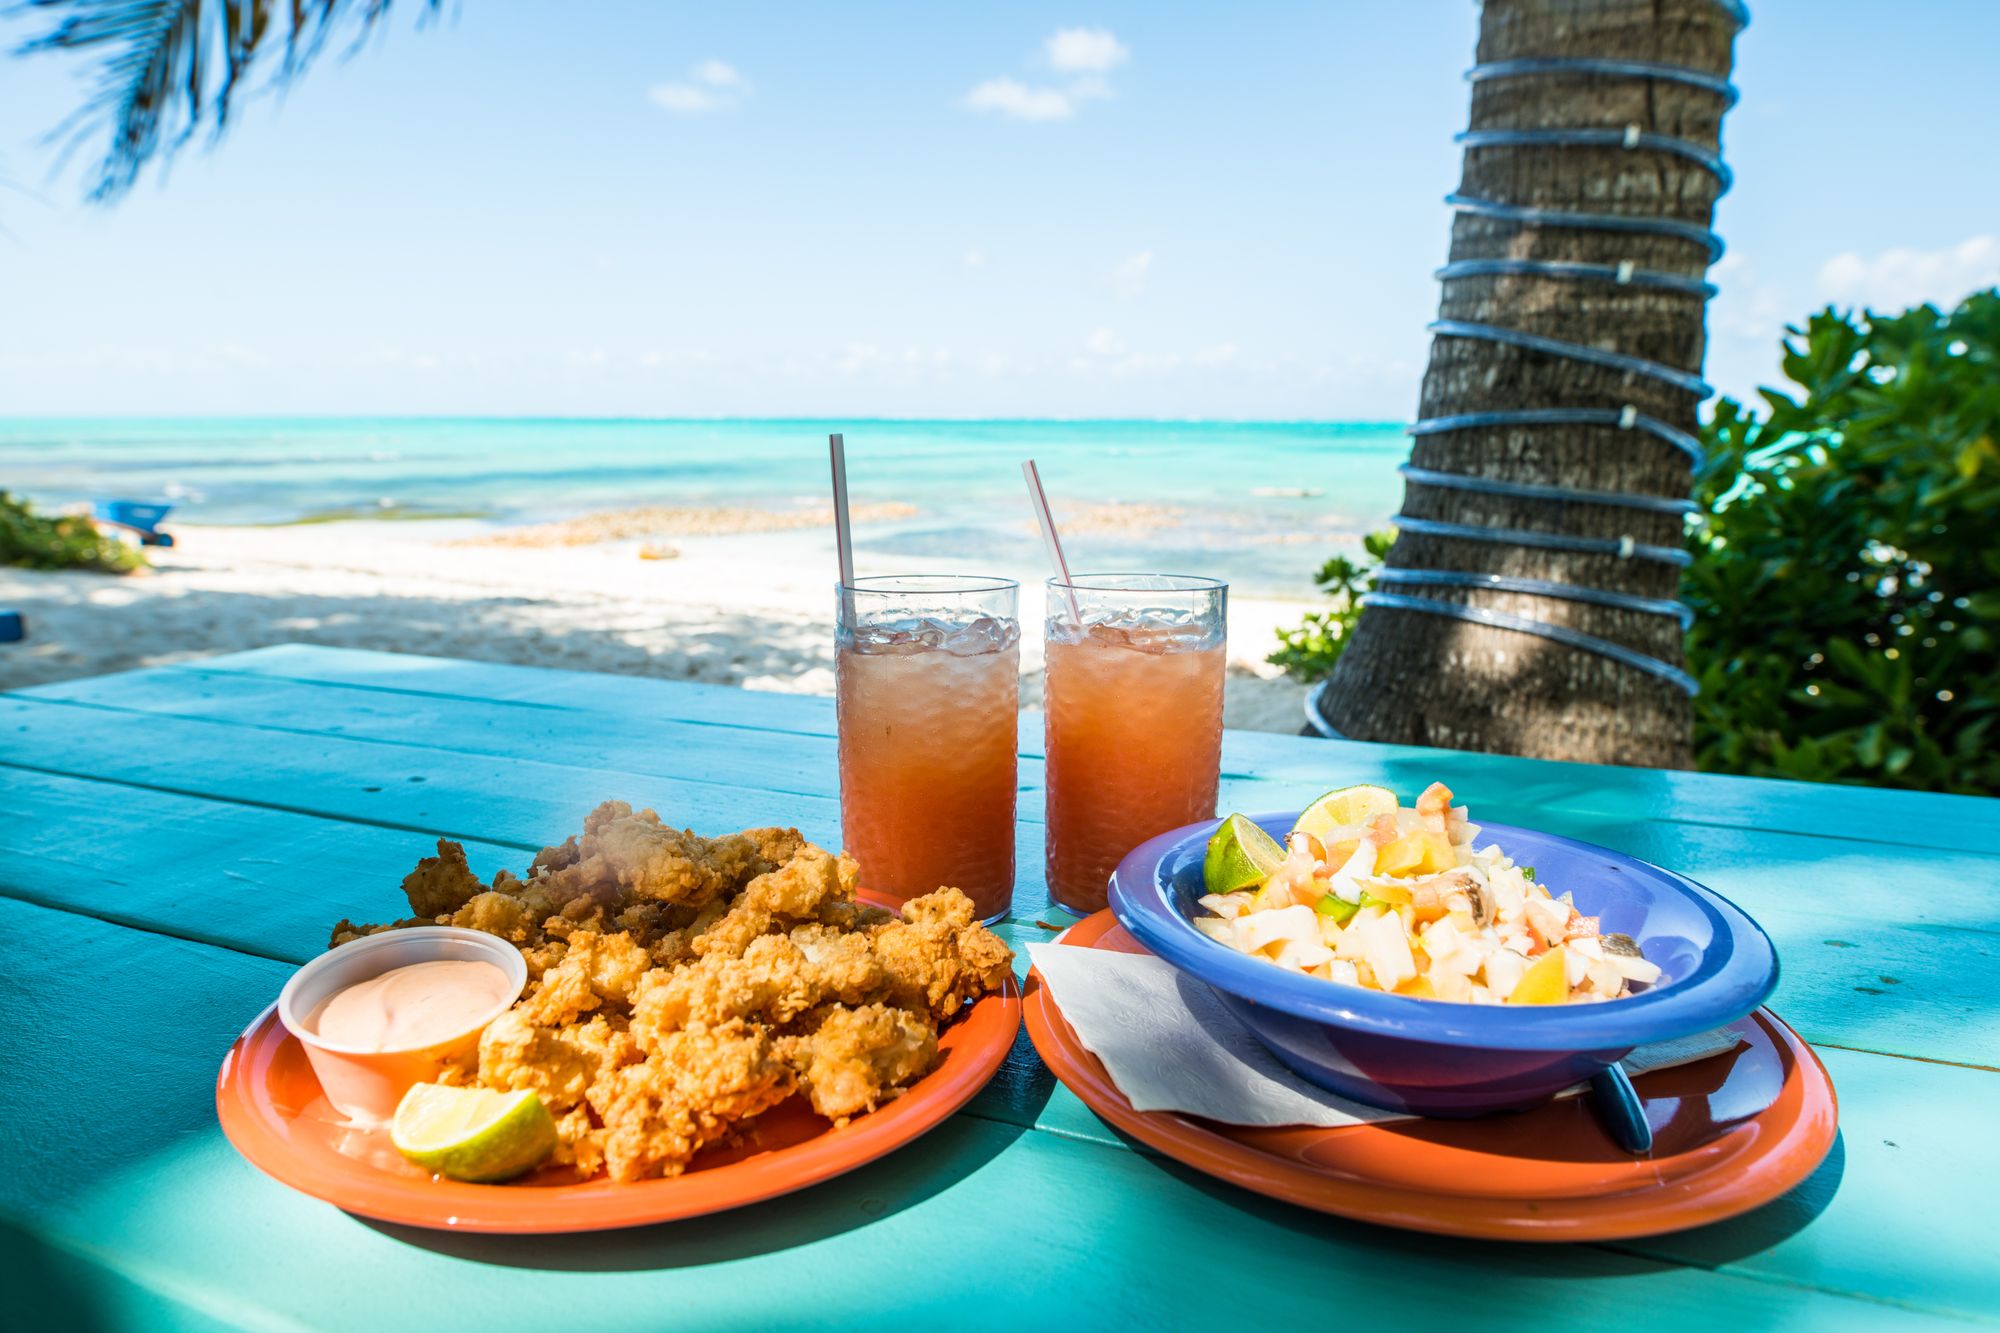 bahamas-food-conch-salad-cracked-conch